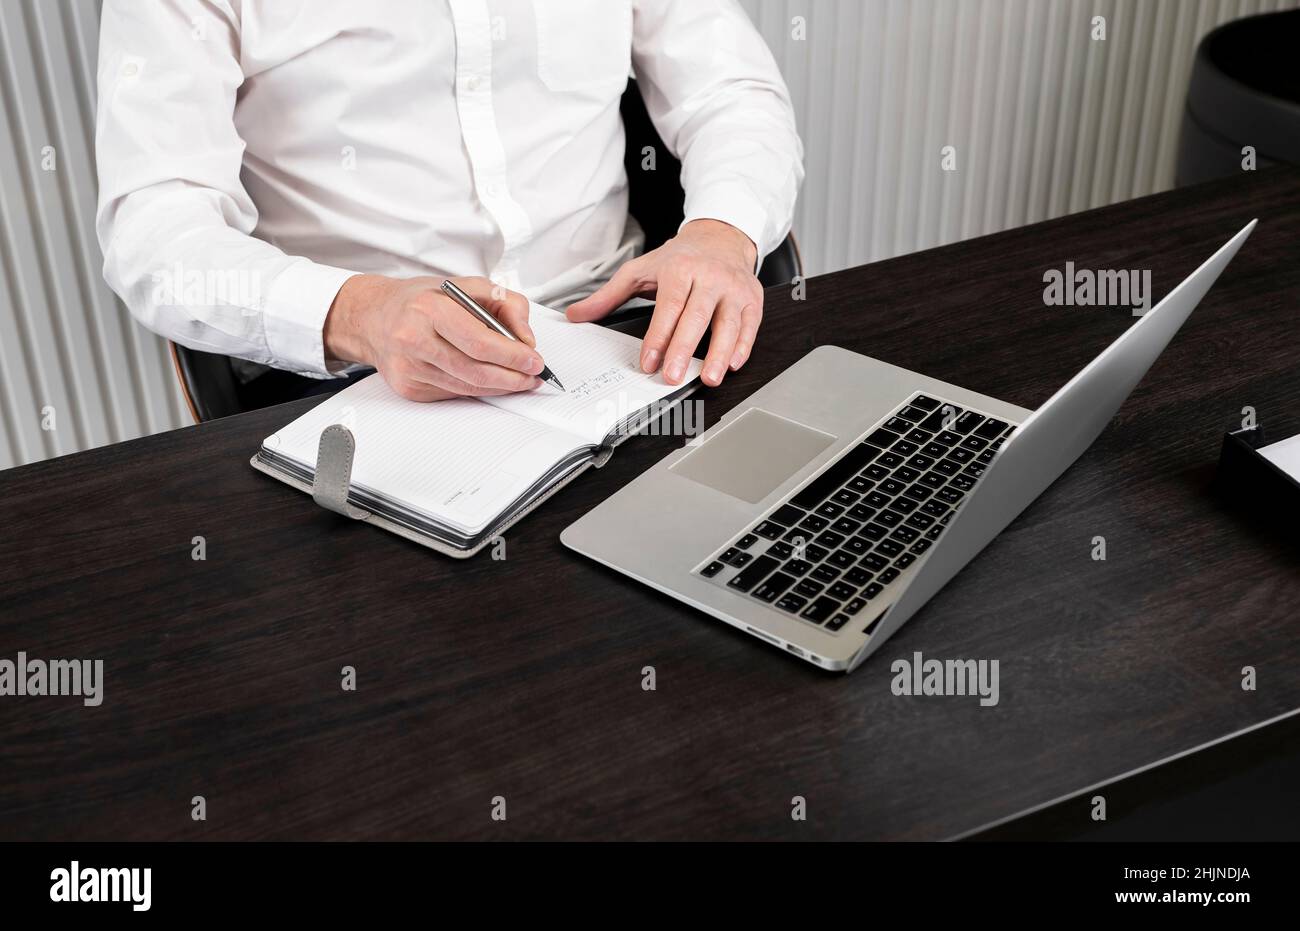 Man taking notes in planner. Businessman sitting at desk and working or studying on laptop. Online education or using computer technology in work concept. High quality photo Stock Photo